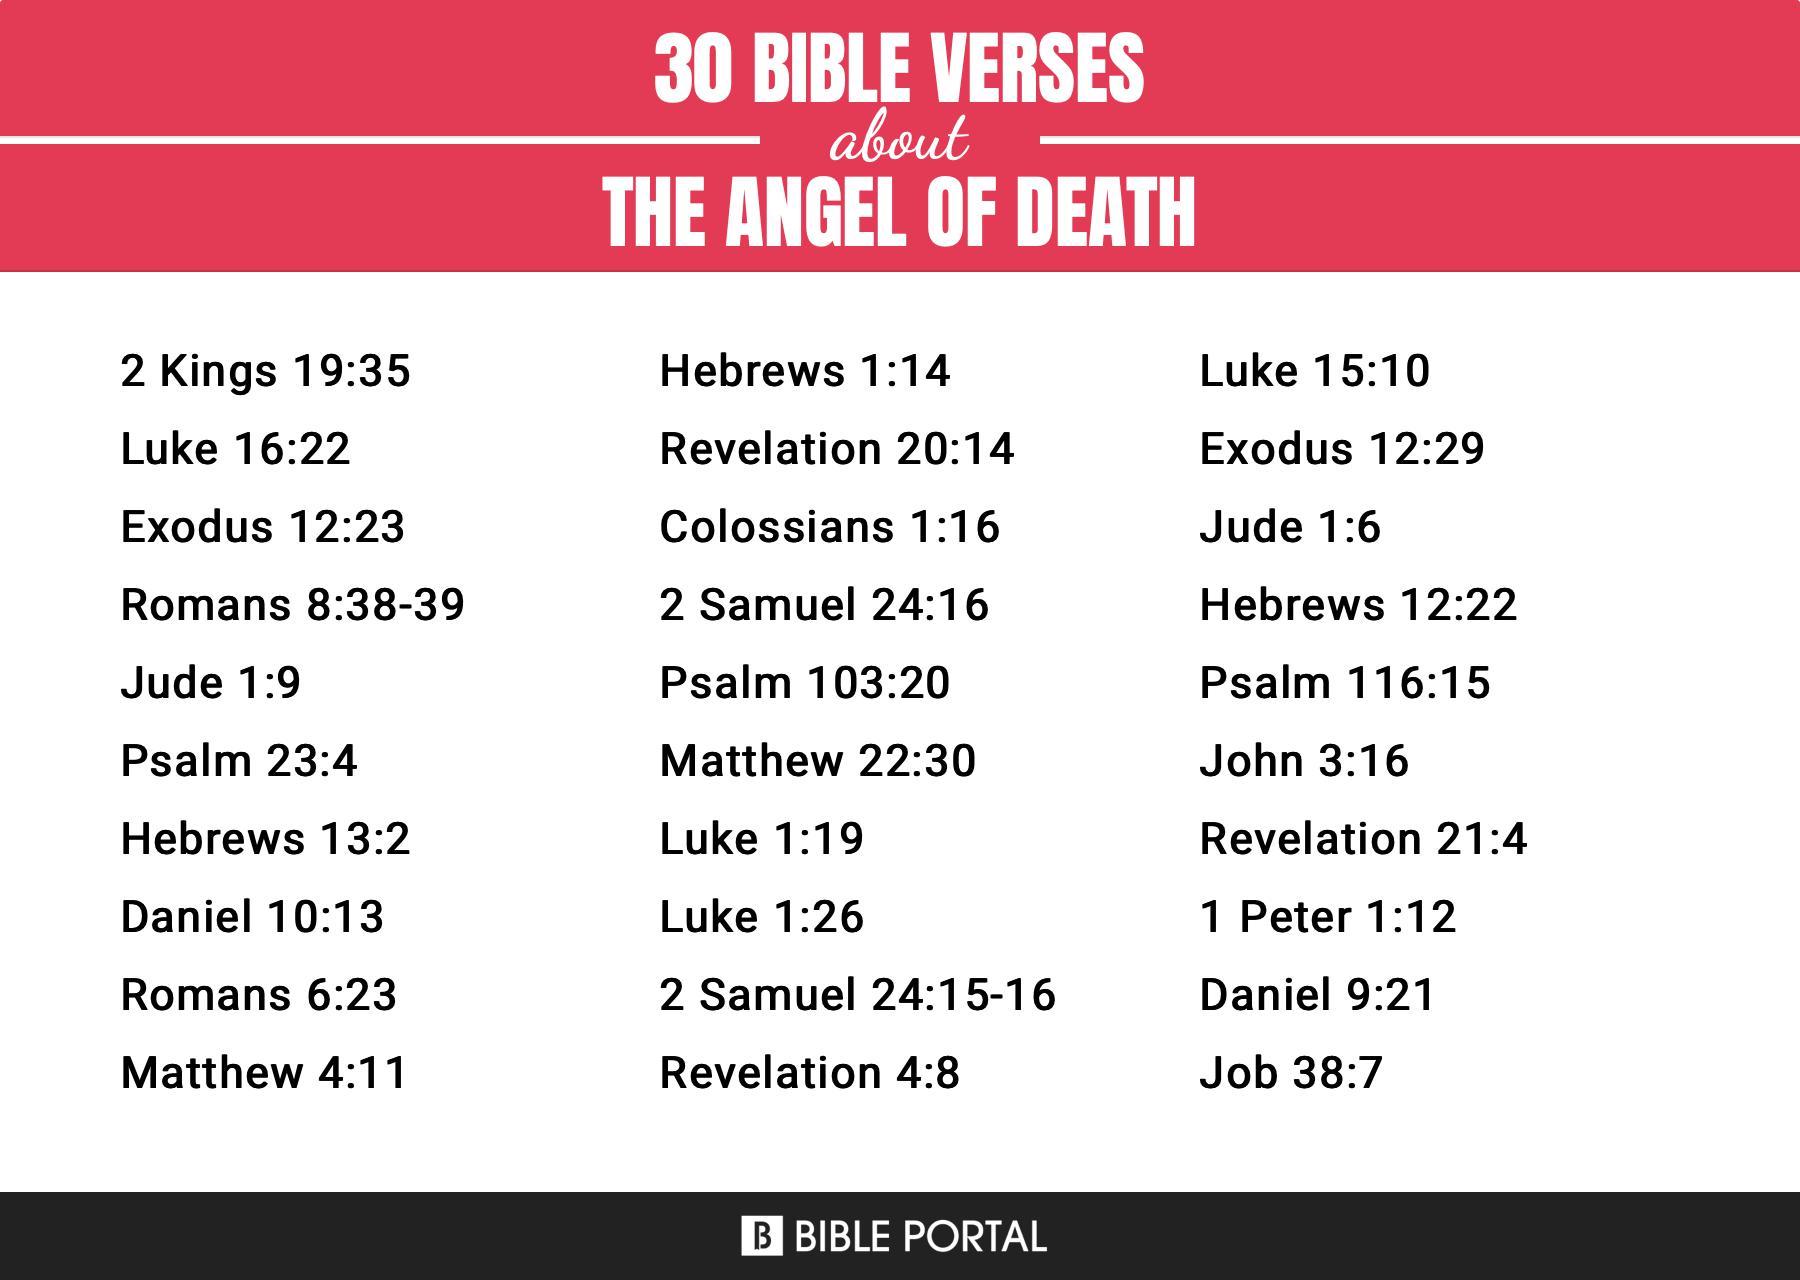 What Does the Bible Say about The Angel Of Death?